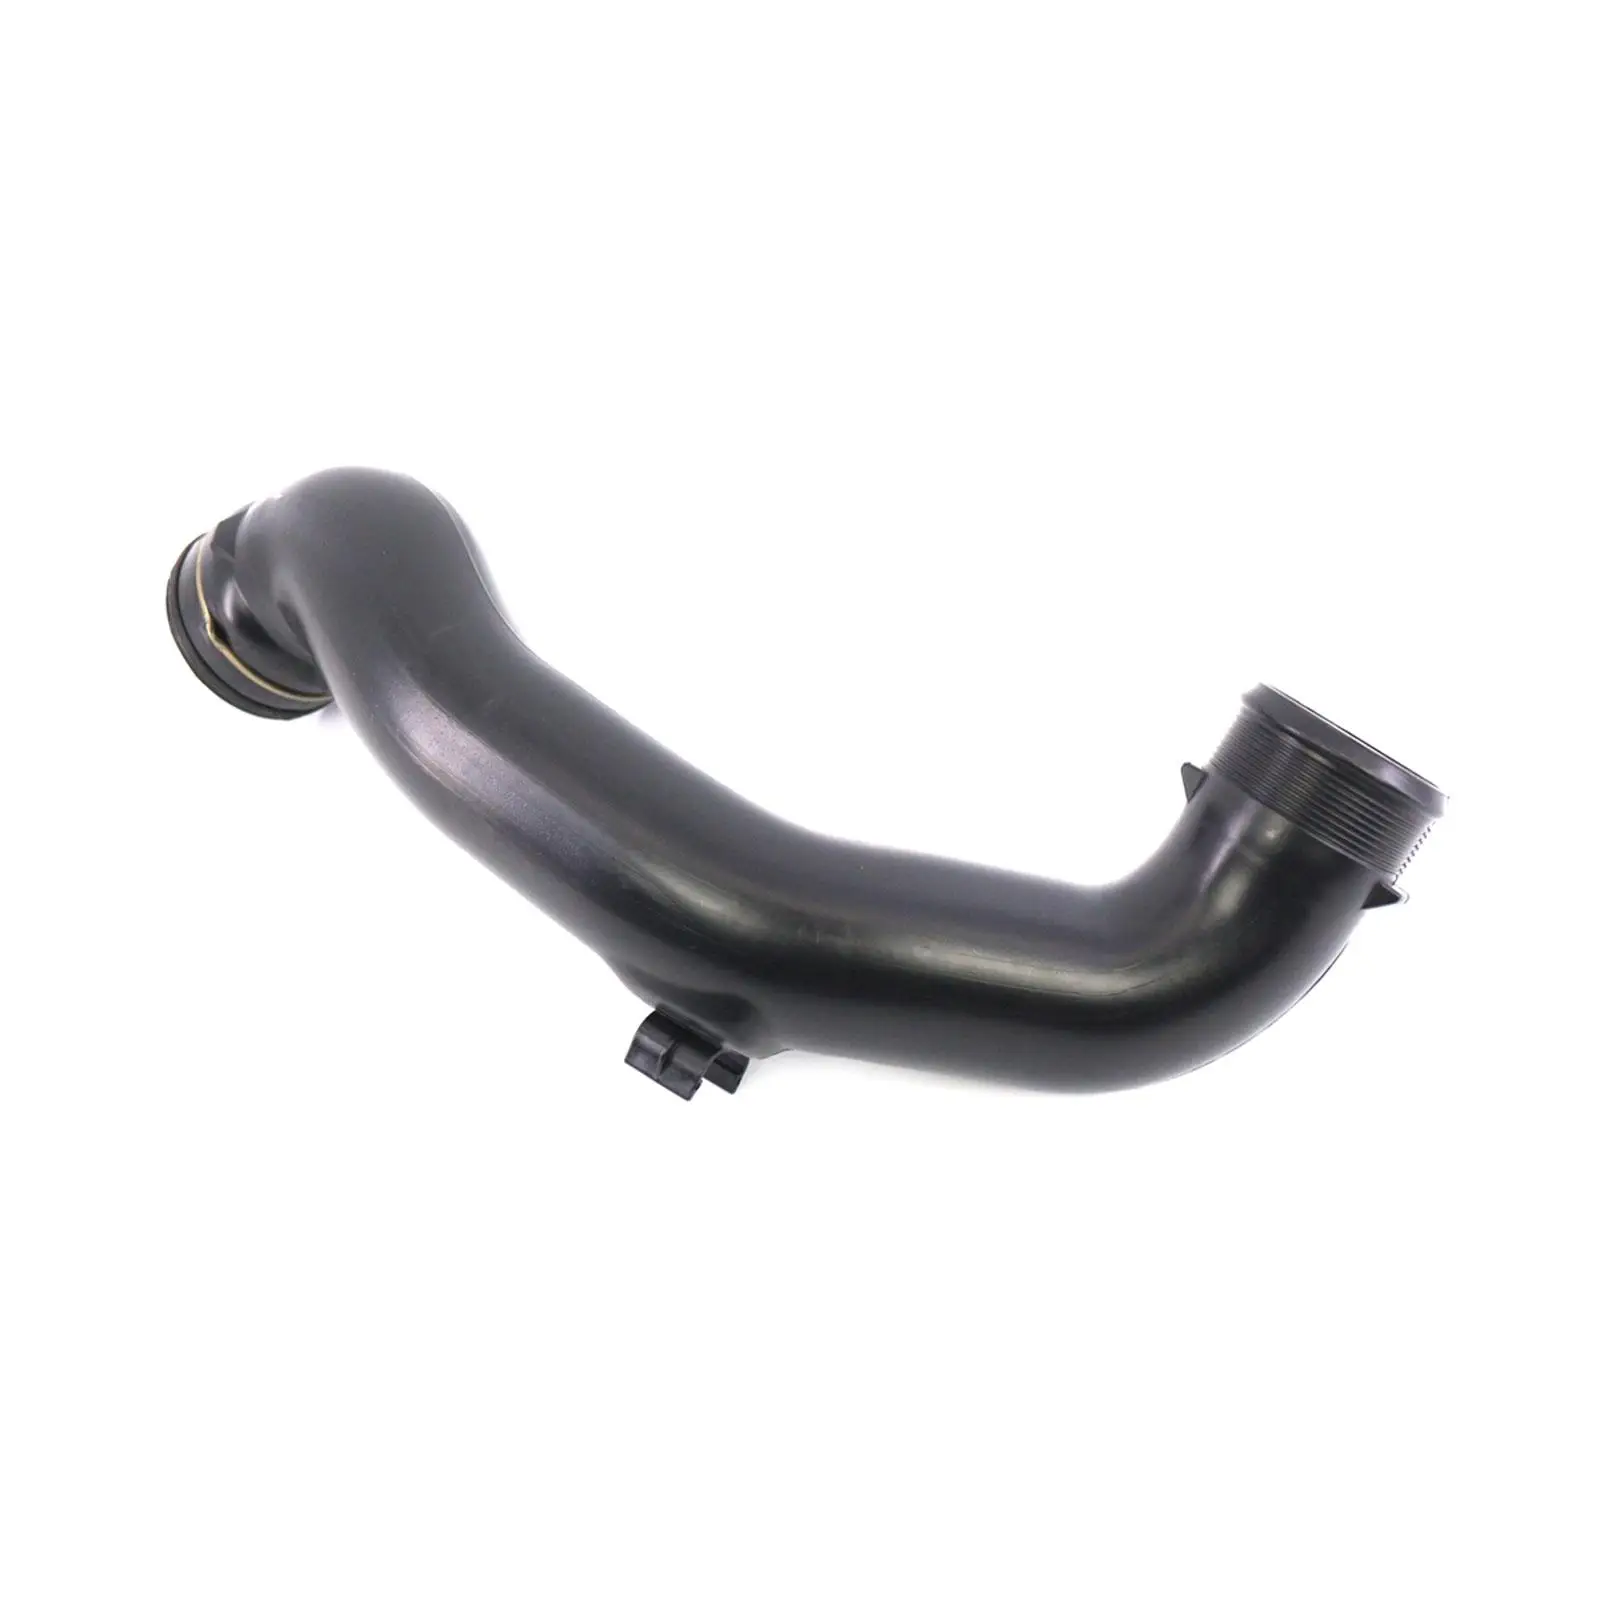 Intake Charge Tube Booster Intake Pipe Replacement Accessory Car Engine Air Intake Hose for BMW x5 E70 Lci x6 E71 x6 F16